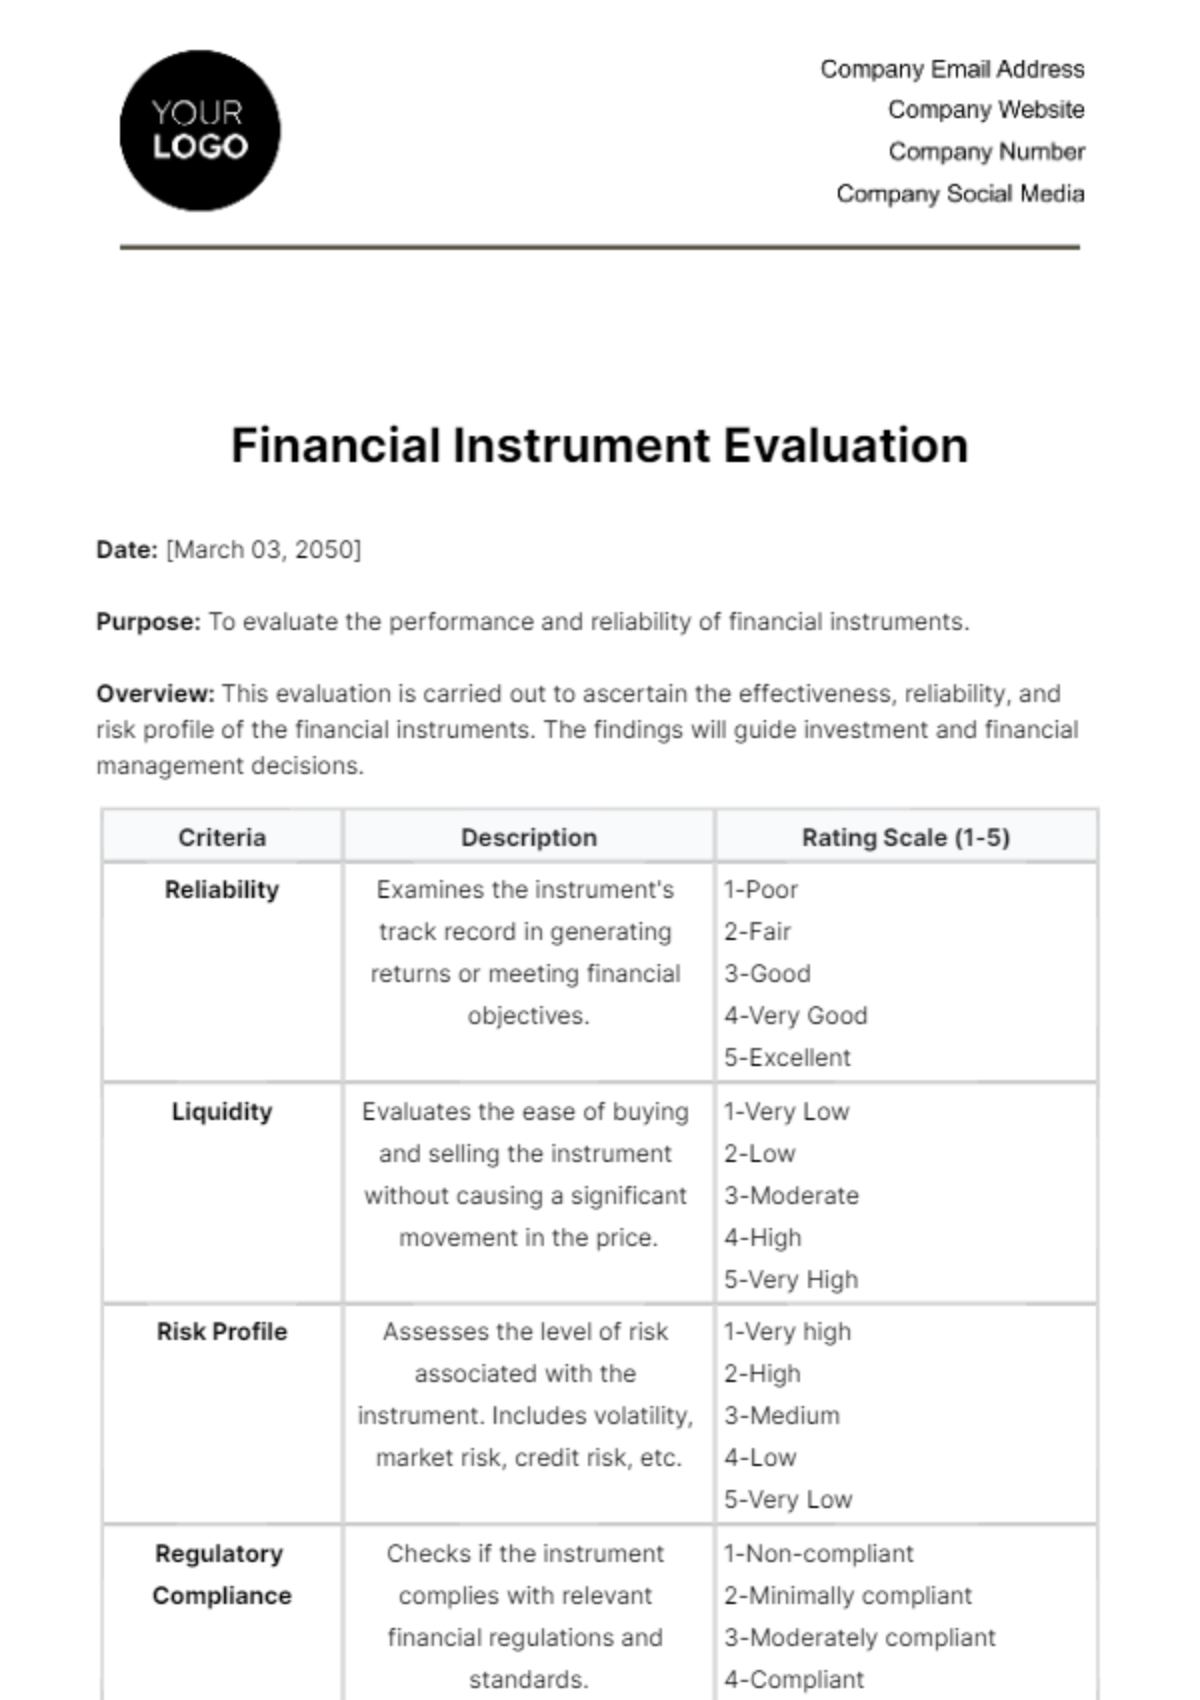 Financial Instrument Evaluation Template